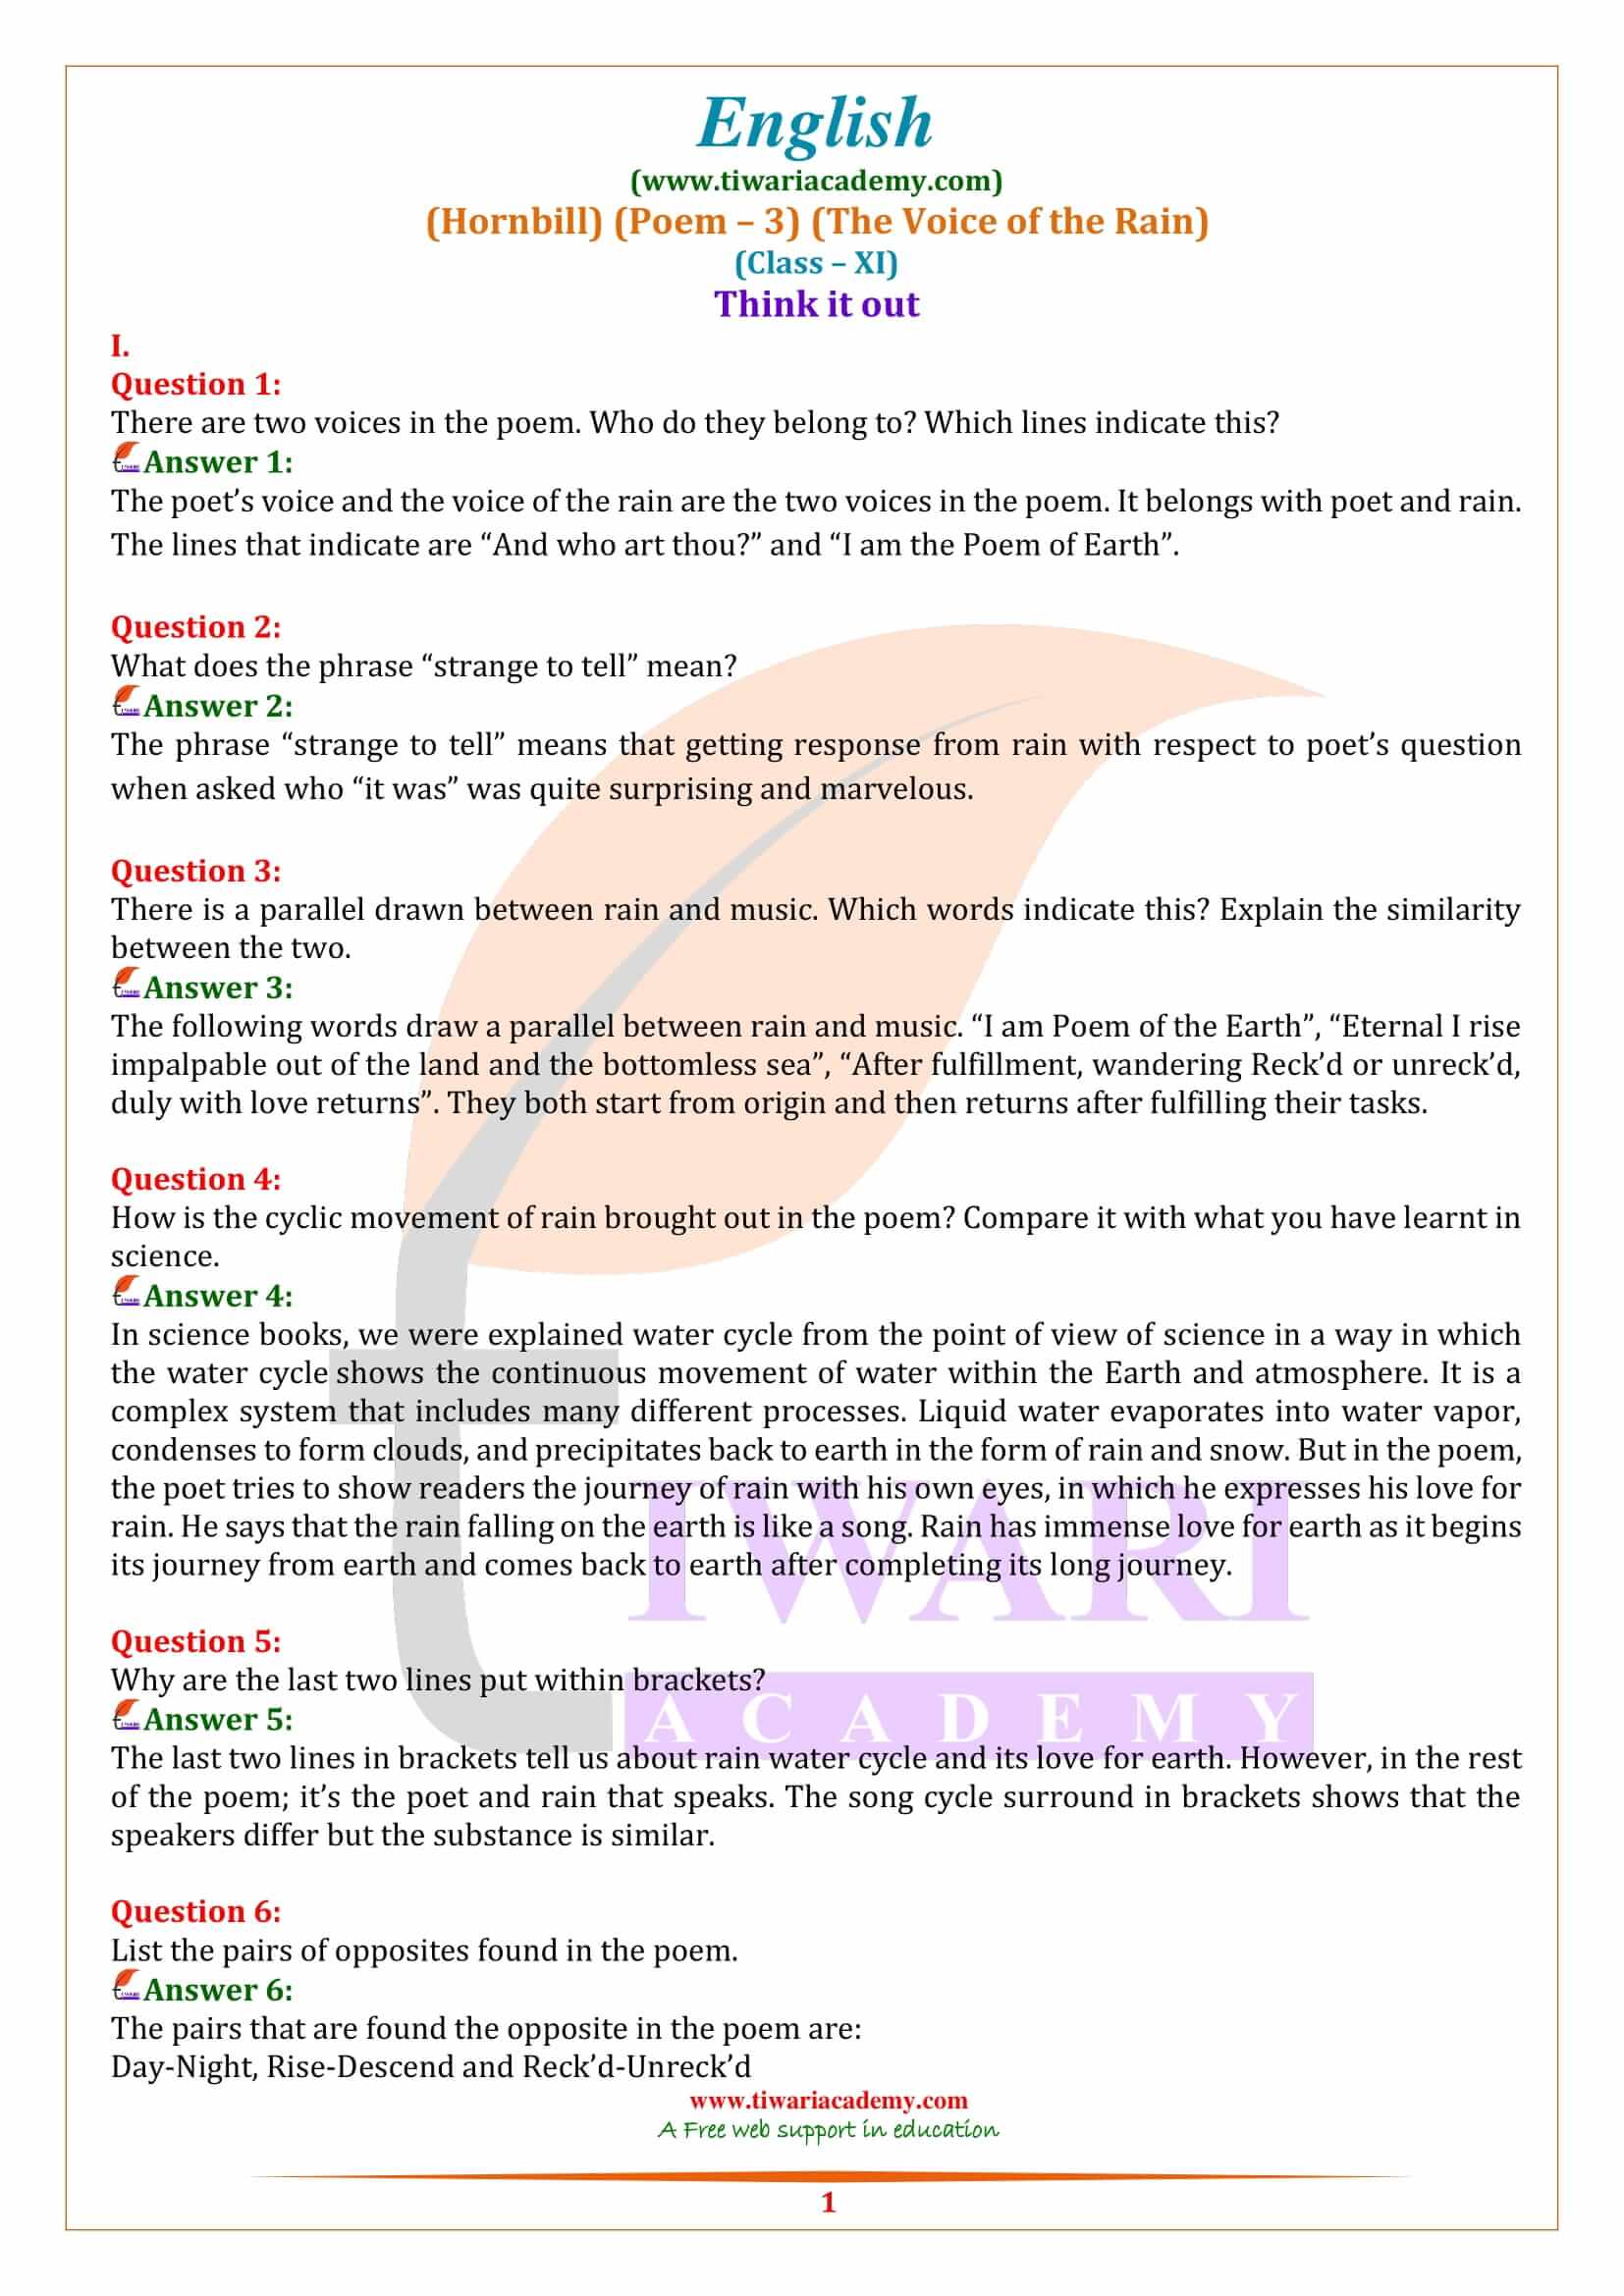 Class 11 English Hornbill Chapter 4 Poem Answers